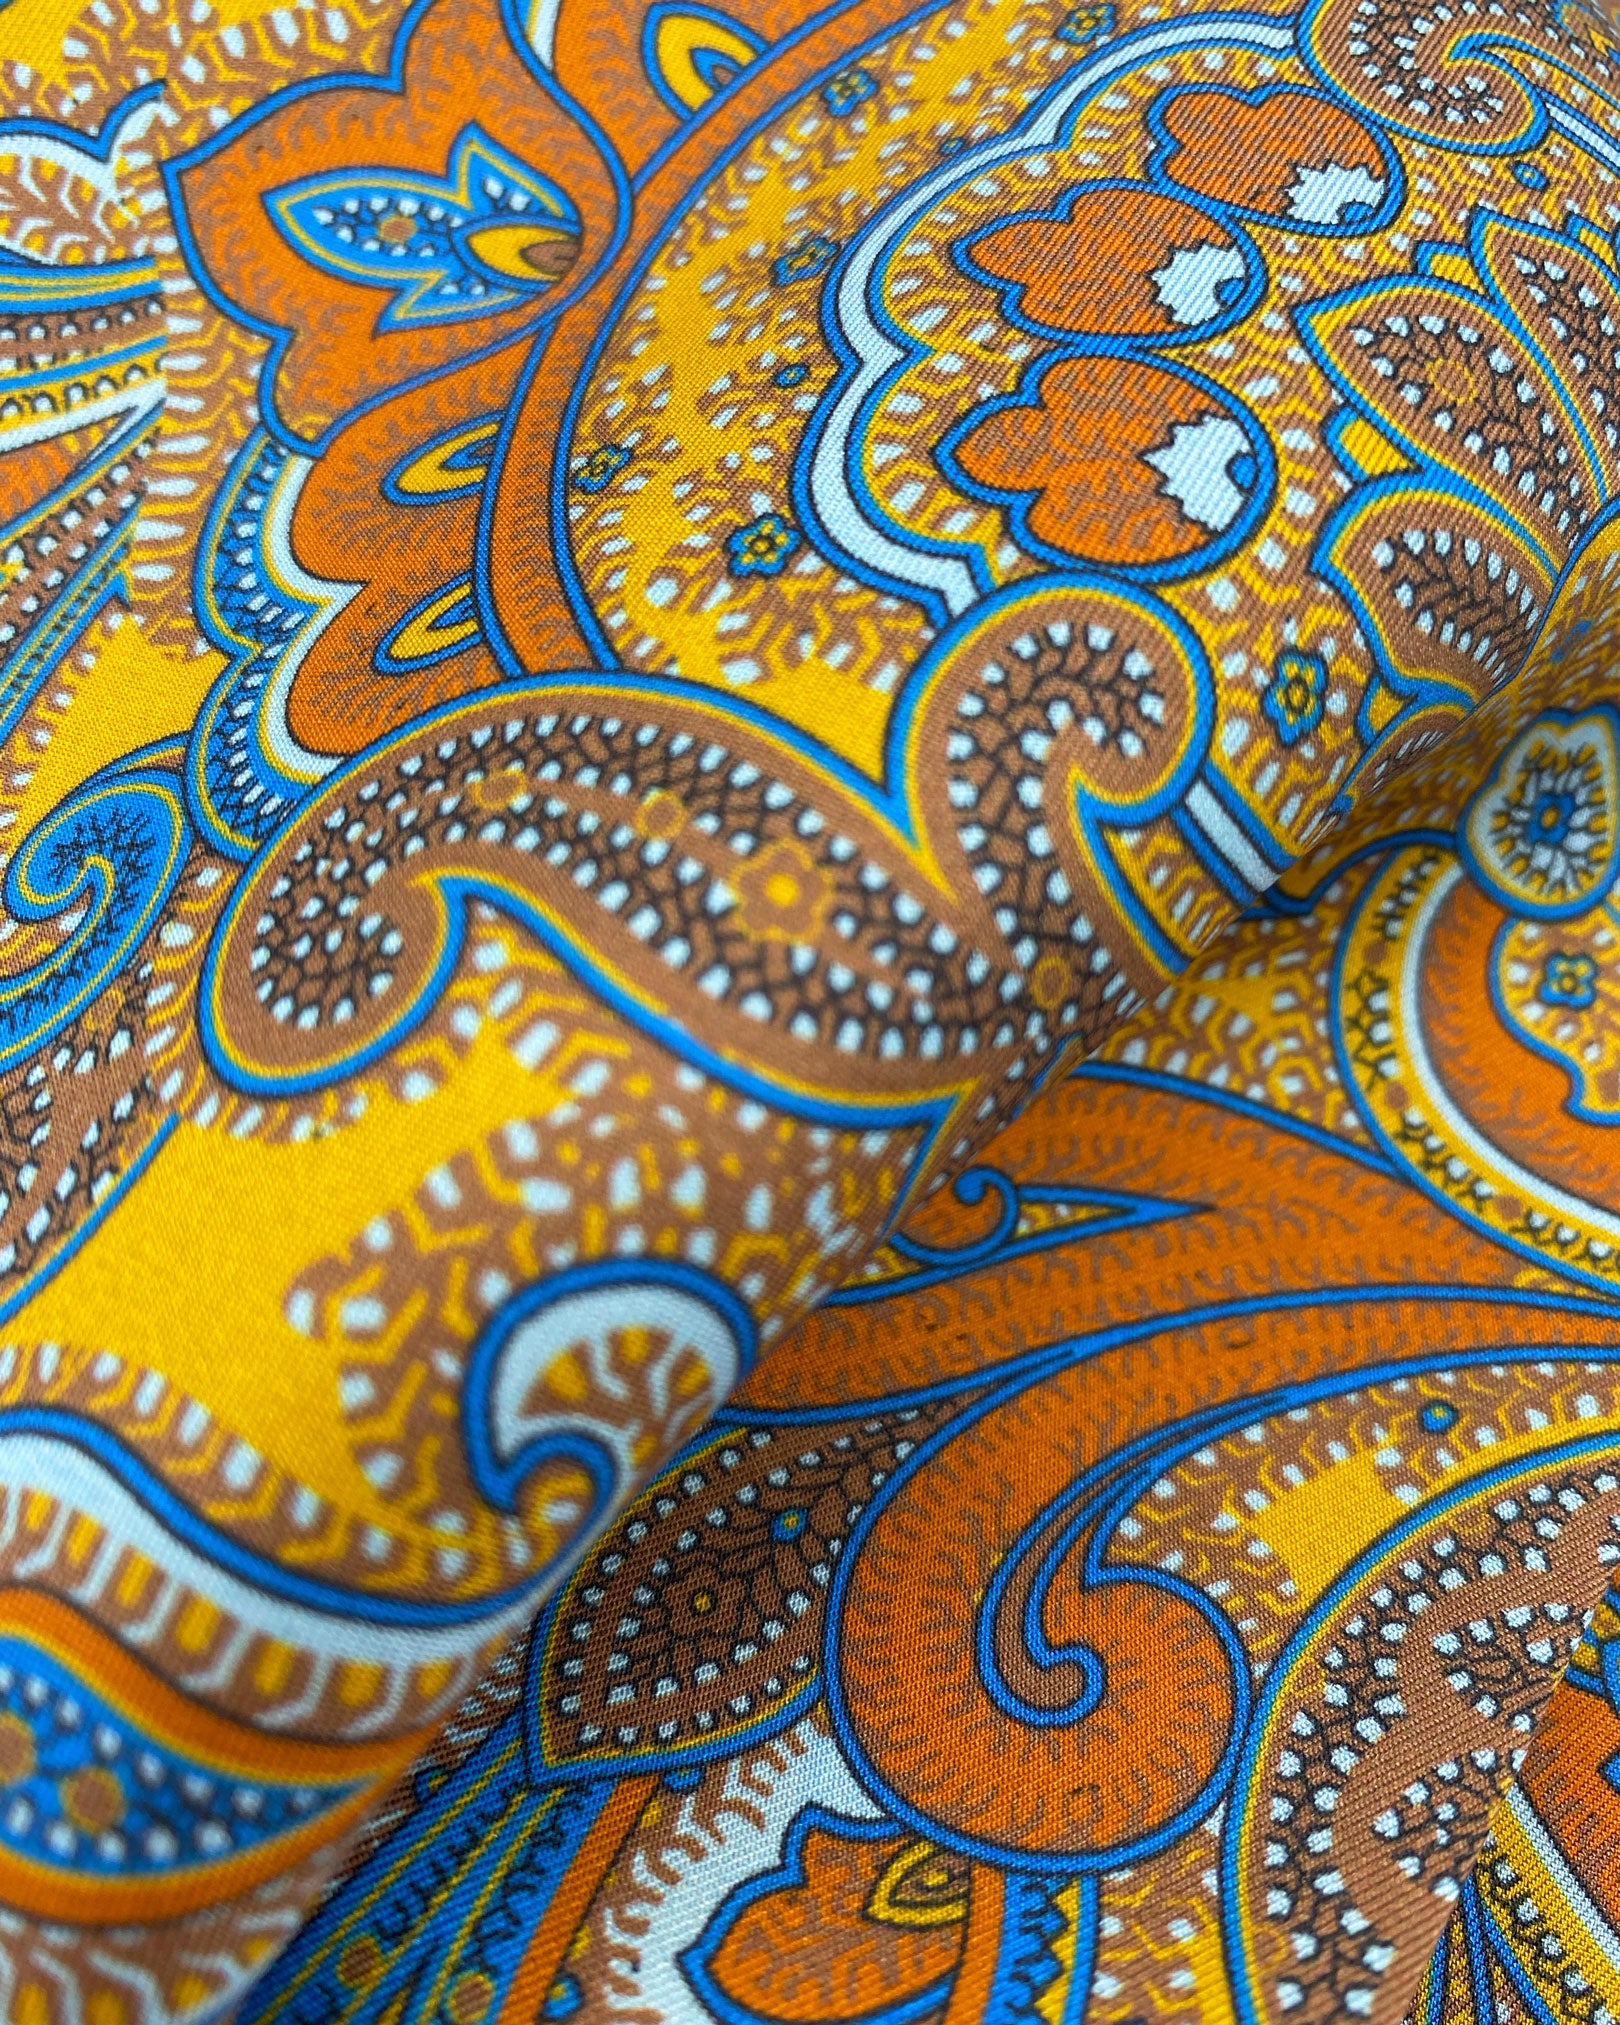 Ruffled close-up view of the 'Carnaby' silk scarf, presenting a closer view of the swirls of warm paisley tones against a bright golden ground and lustre of the silk material.